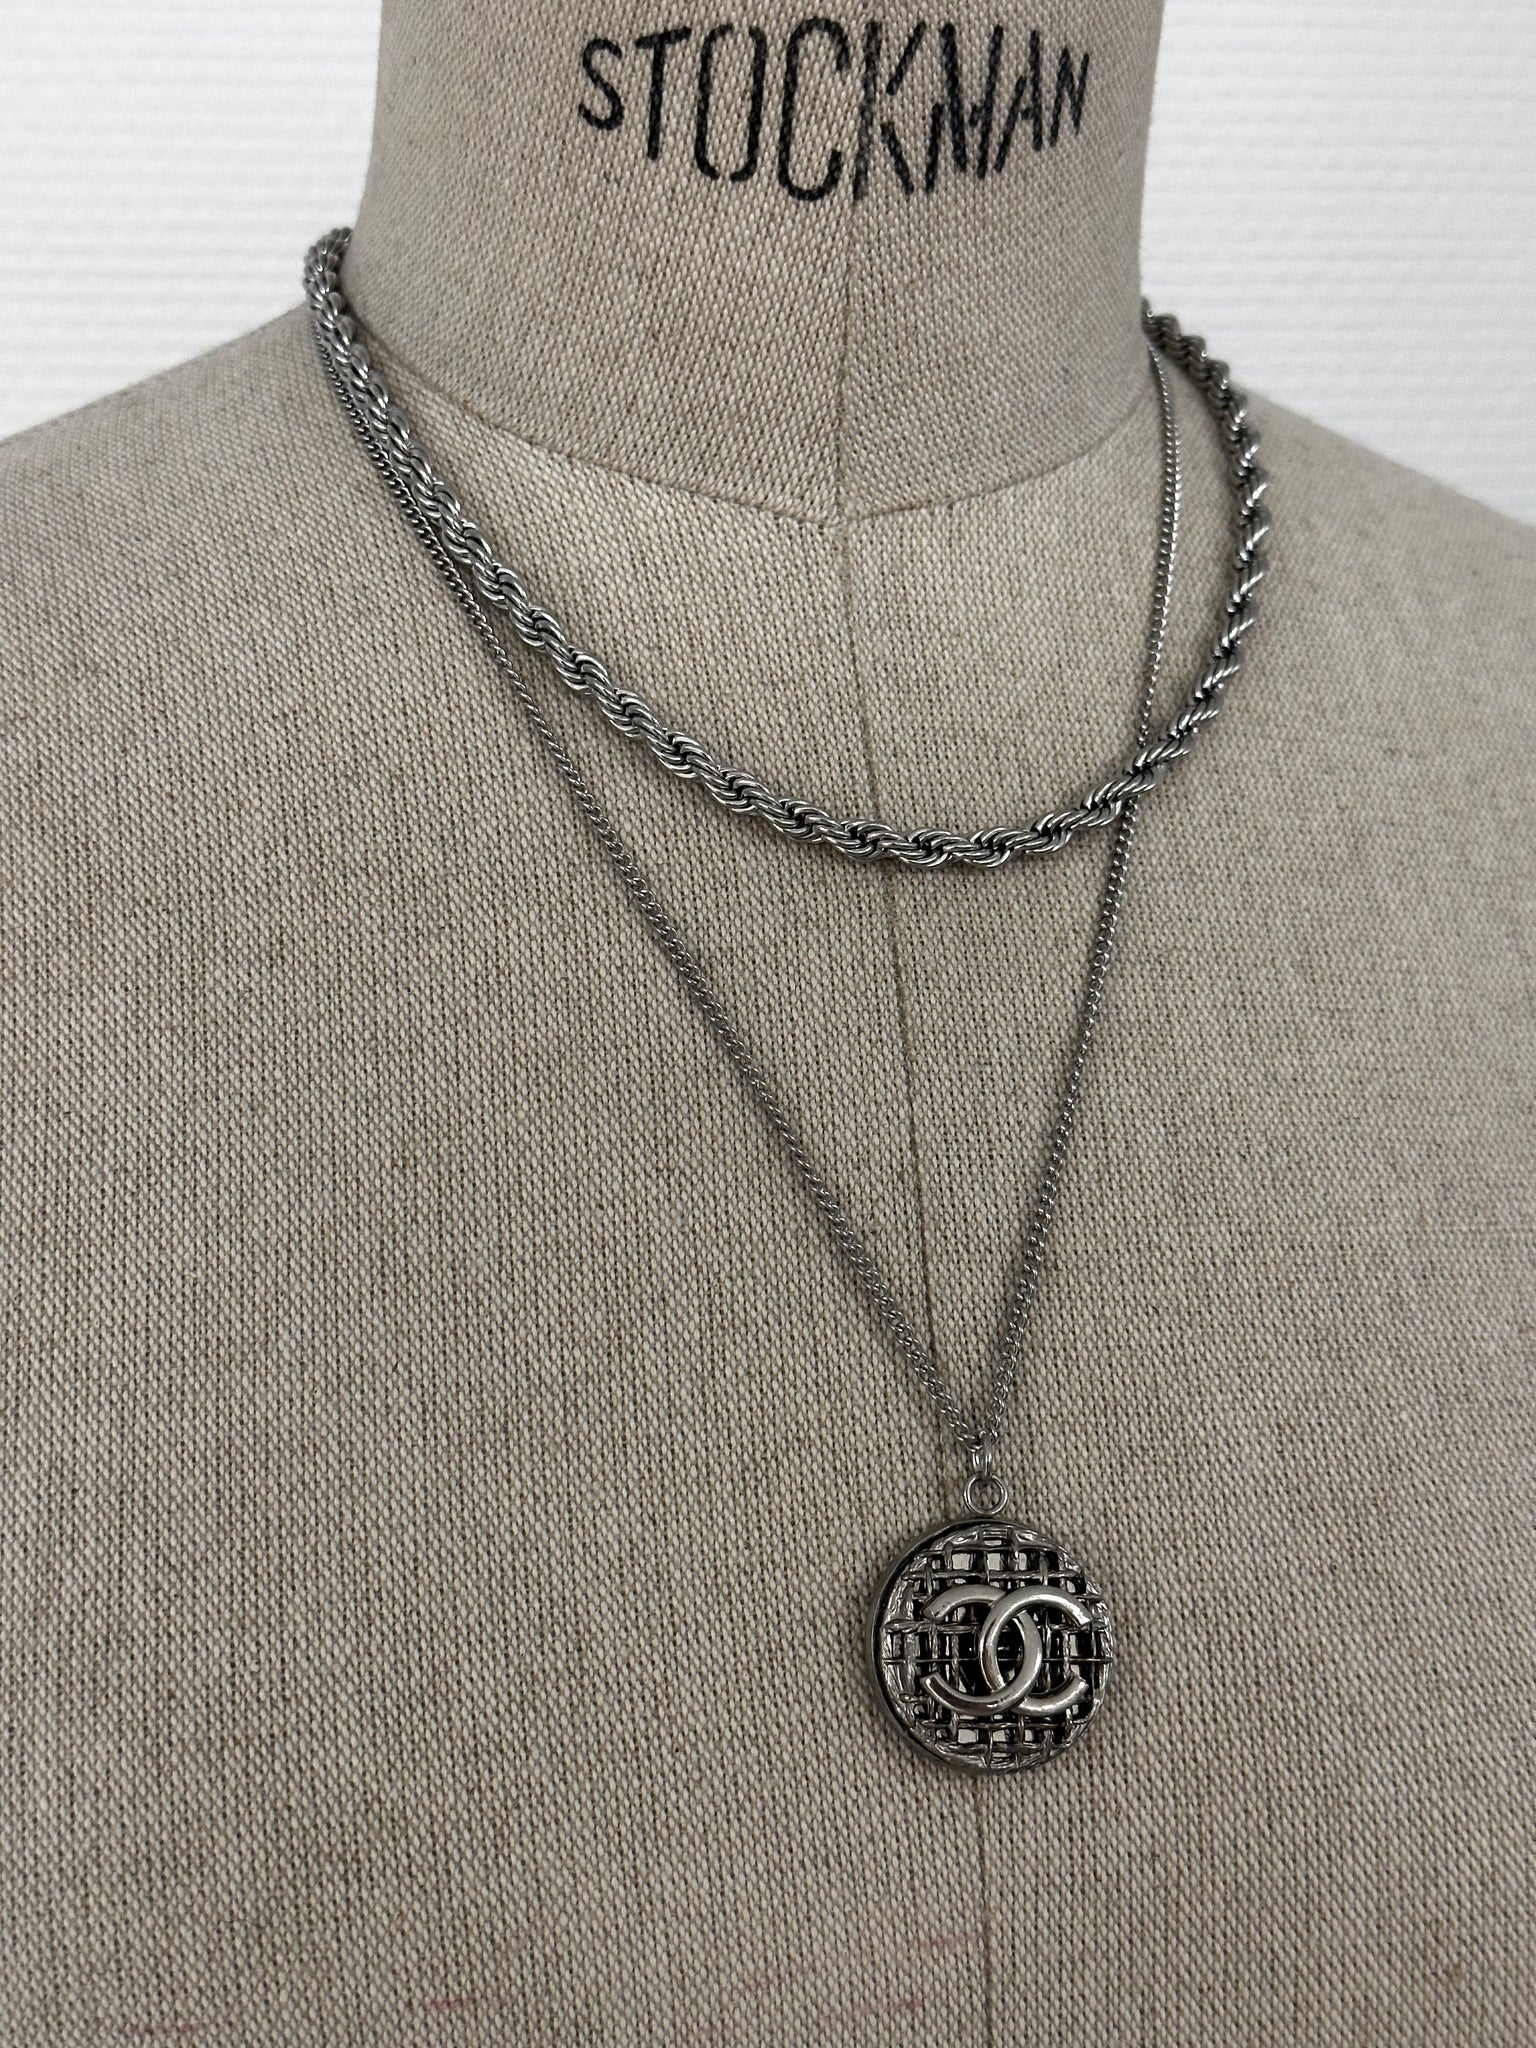 Collier upcyclé grille